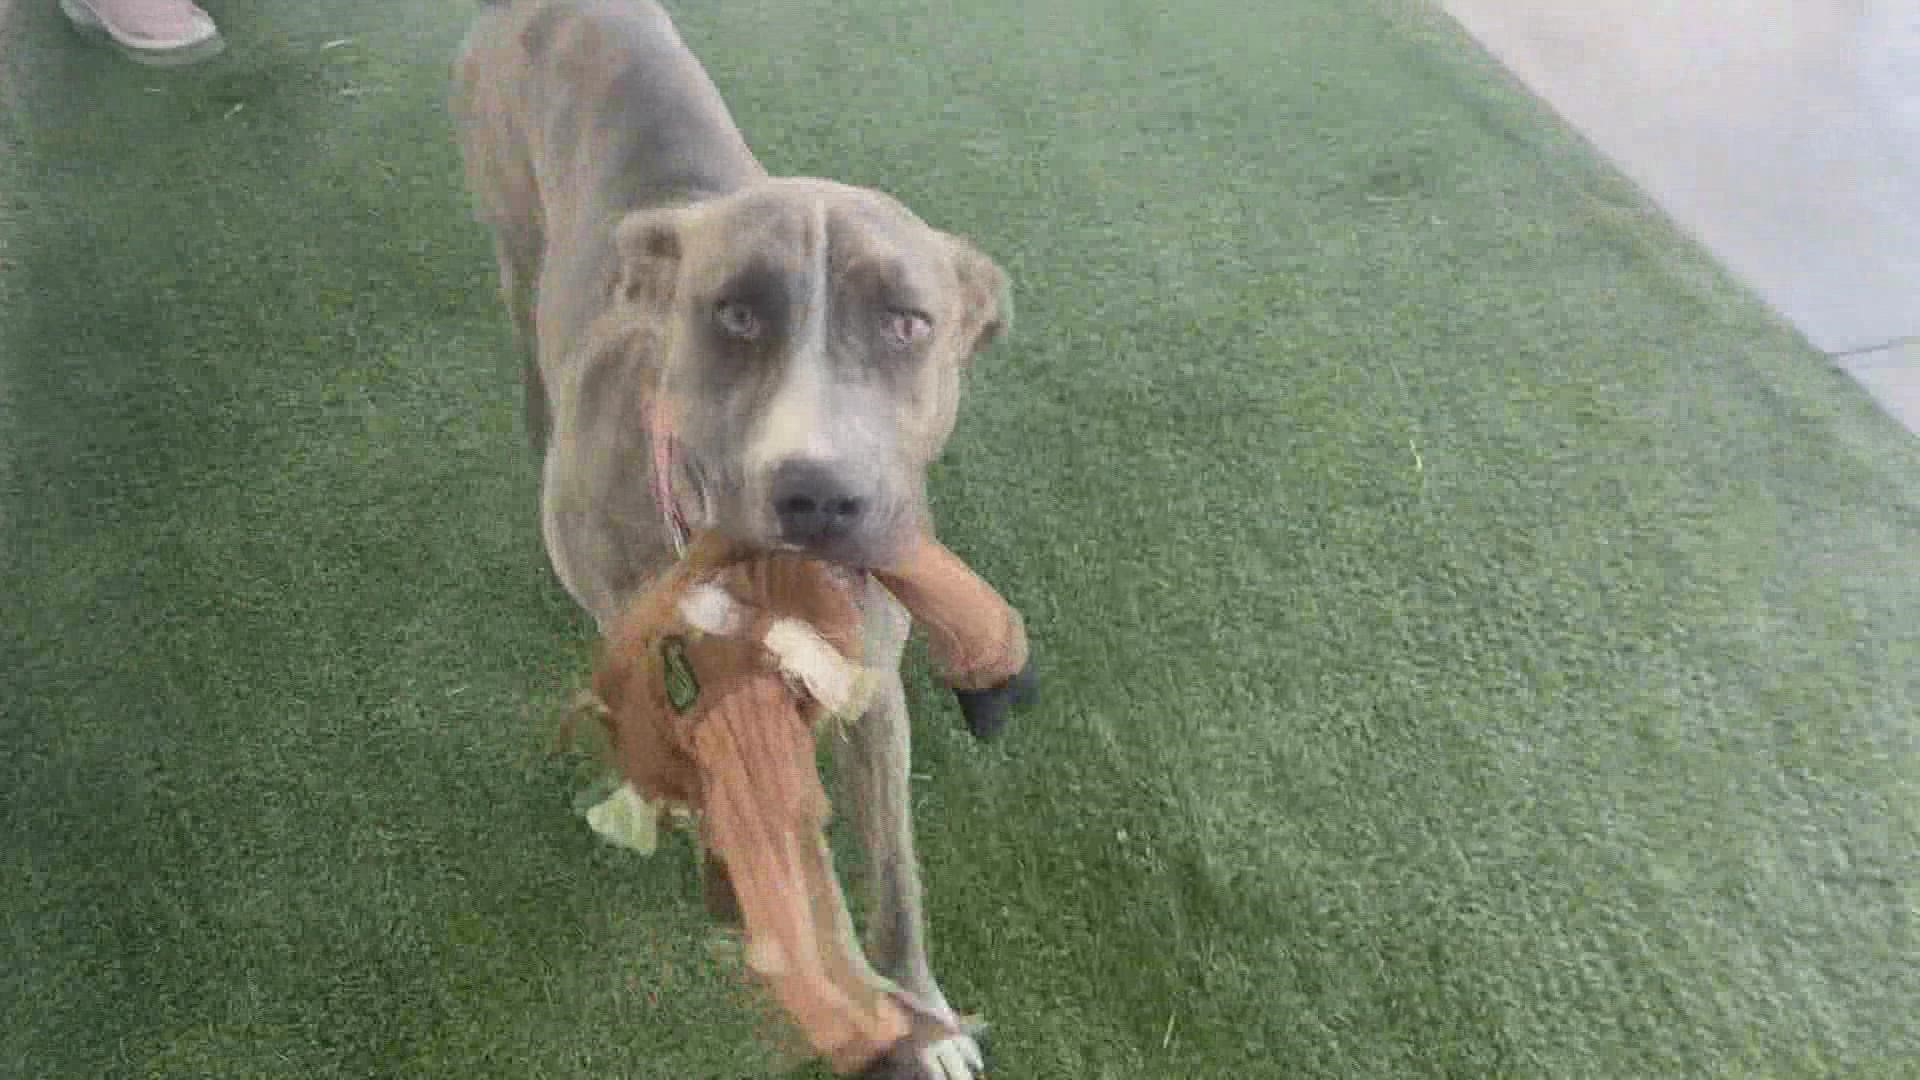 Nikki is an eight-month-old pitbull/terrier mix who has survived parvo twice.